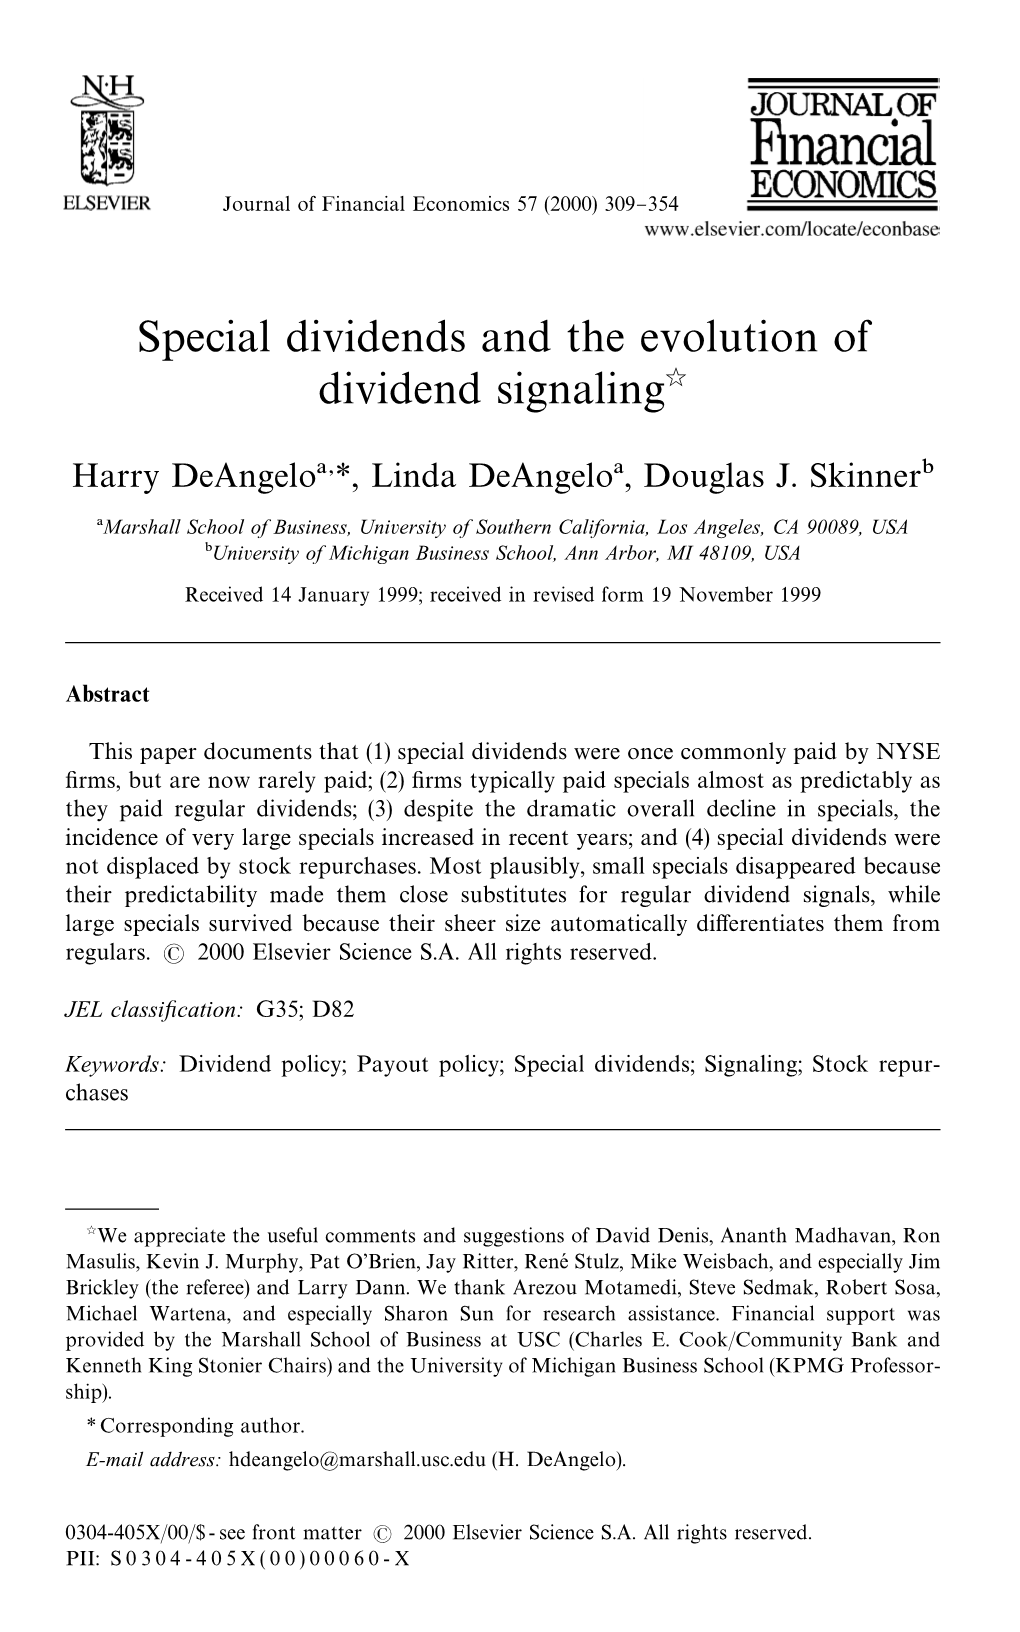 Special Dividends and the Evolution of Dividend Signalingଝ